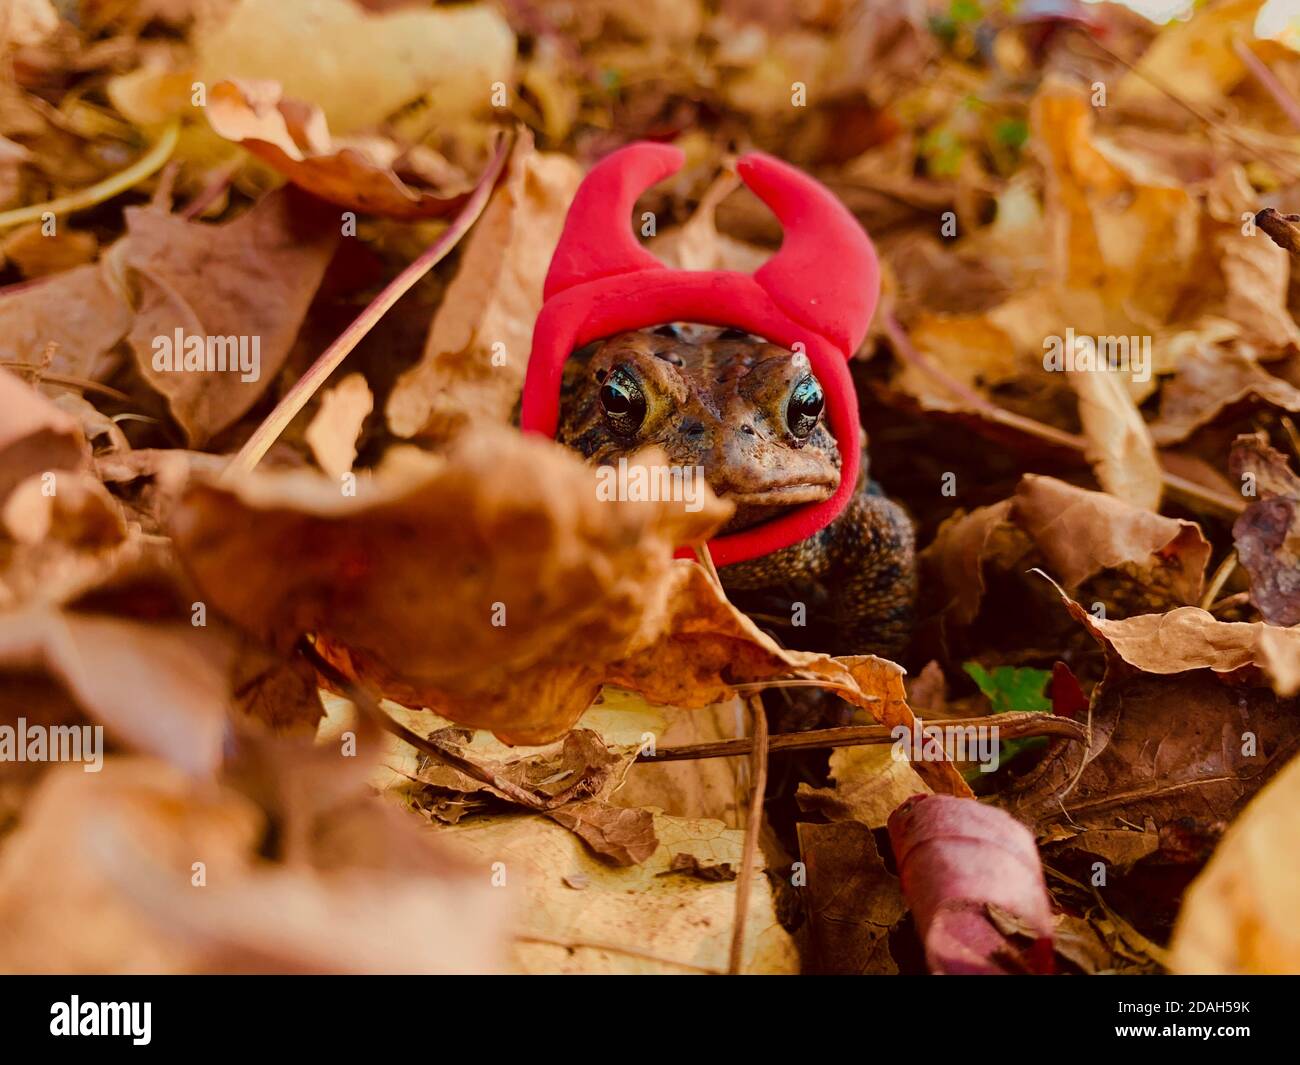 just a toad enjoying some lovely fall vibes Stock Photo